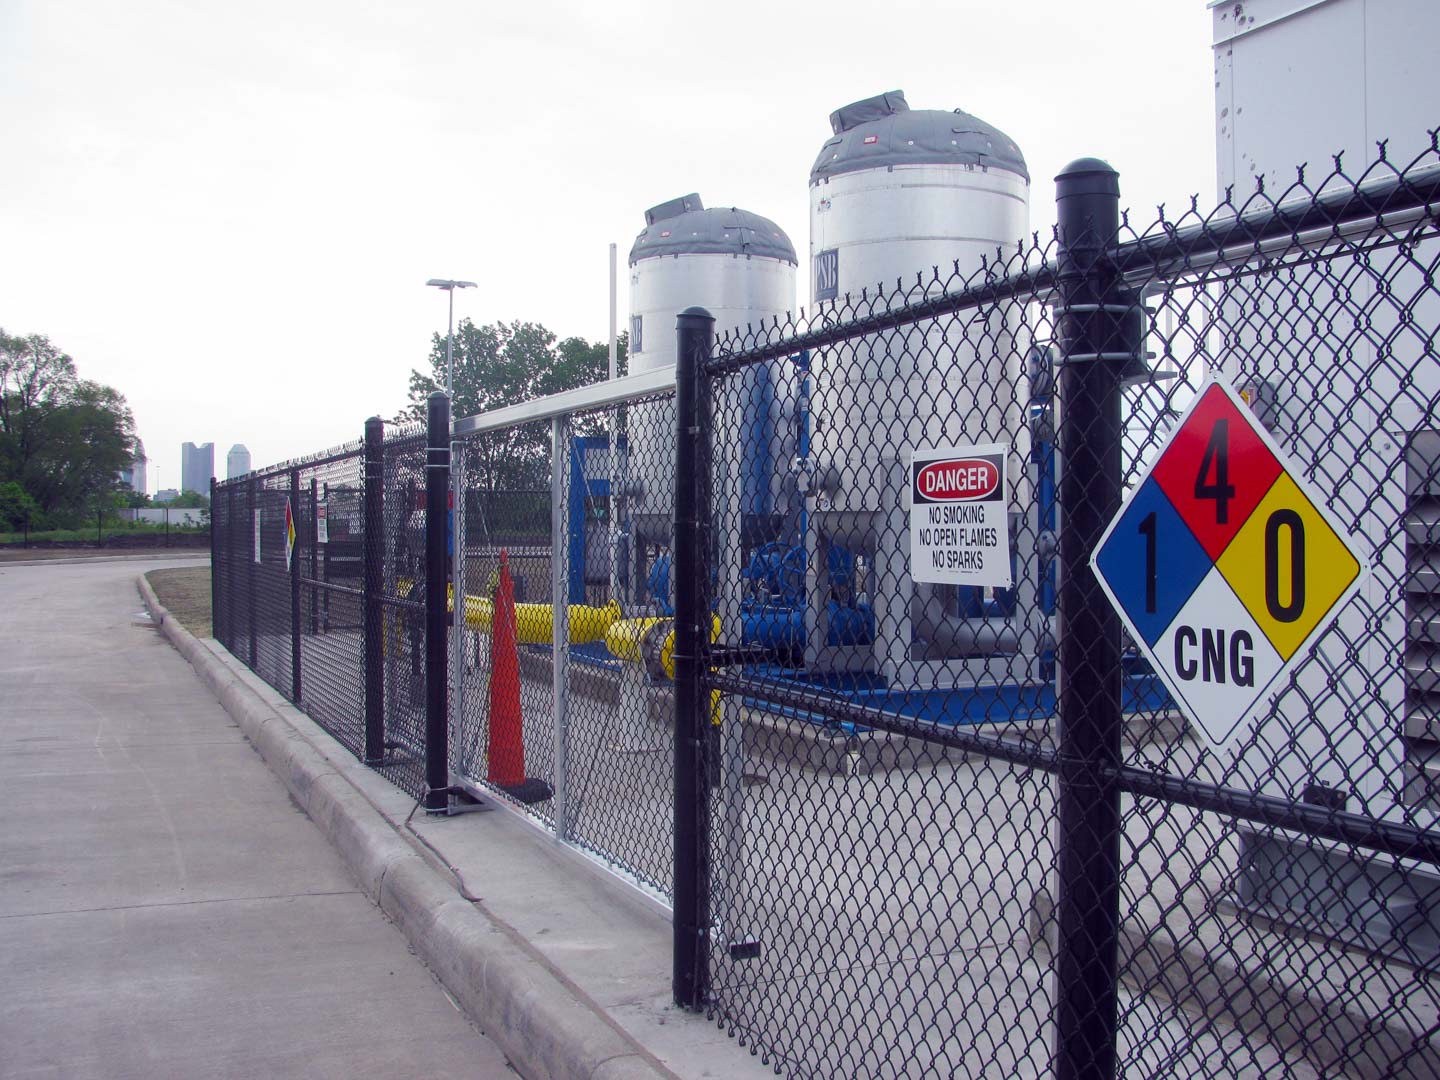 CNG canisters